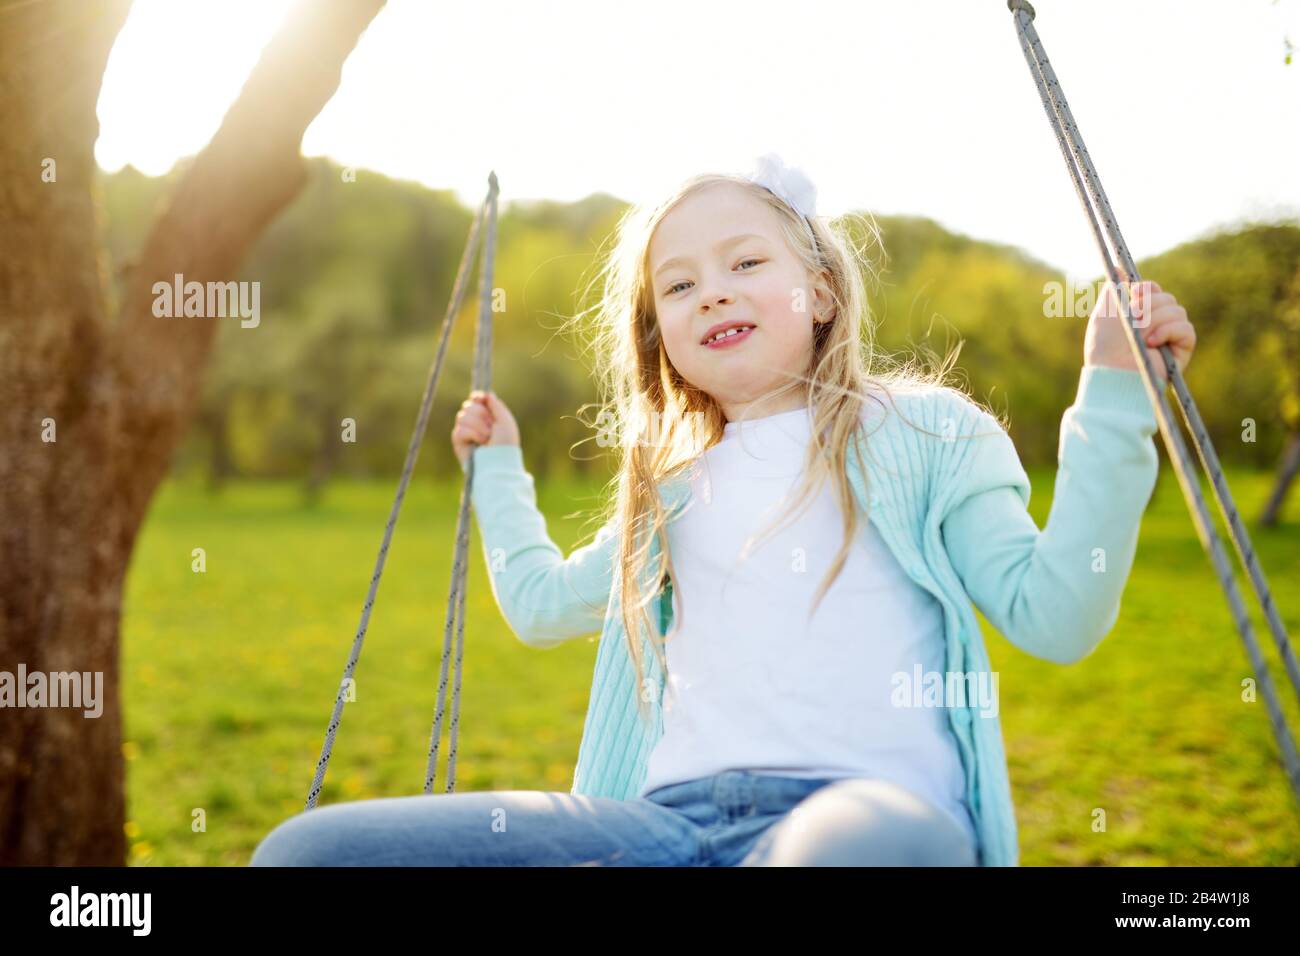 Cute little girl having fun on a swing outdoors in summer garden. Summer leisure for small kids. Stock Photo